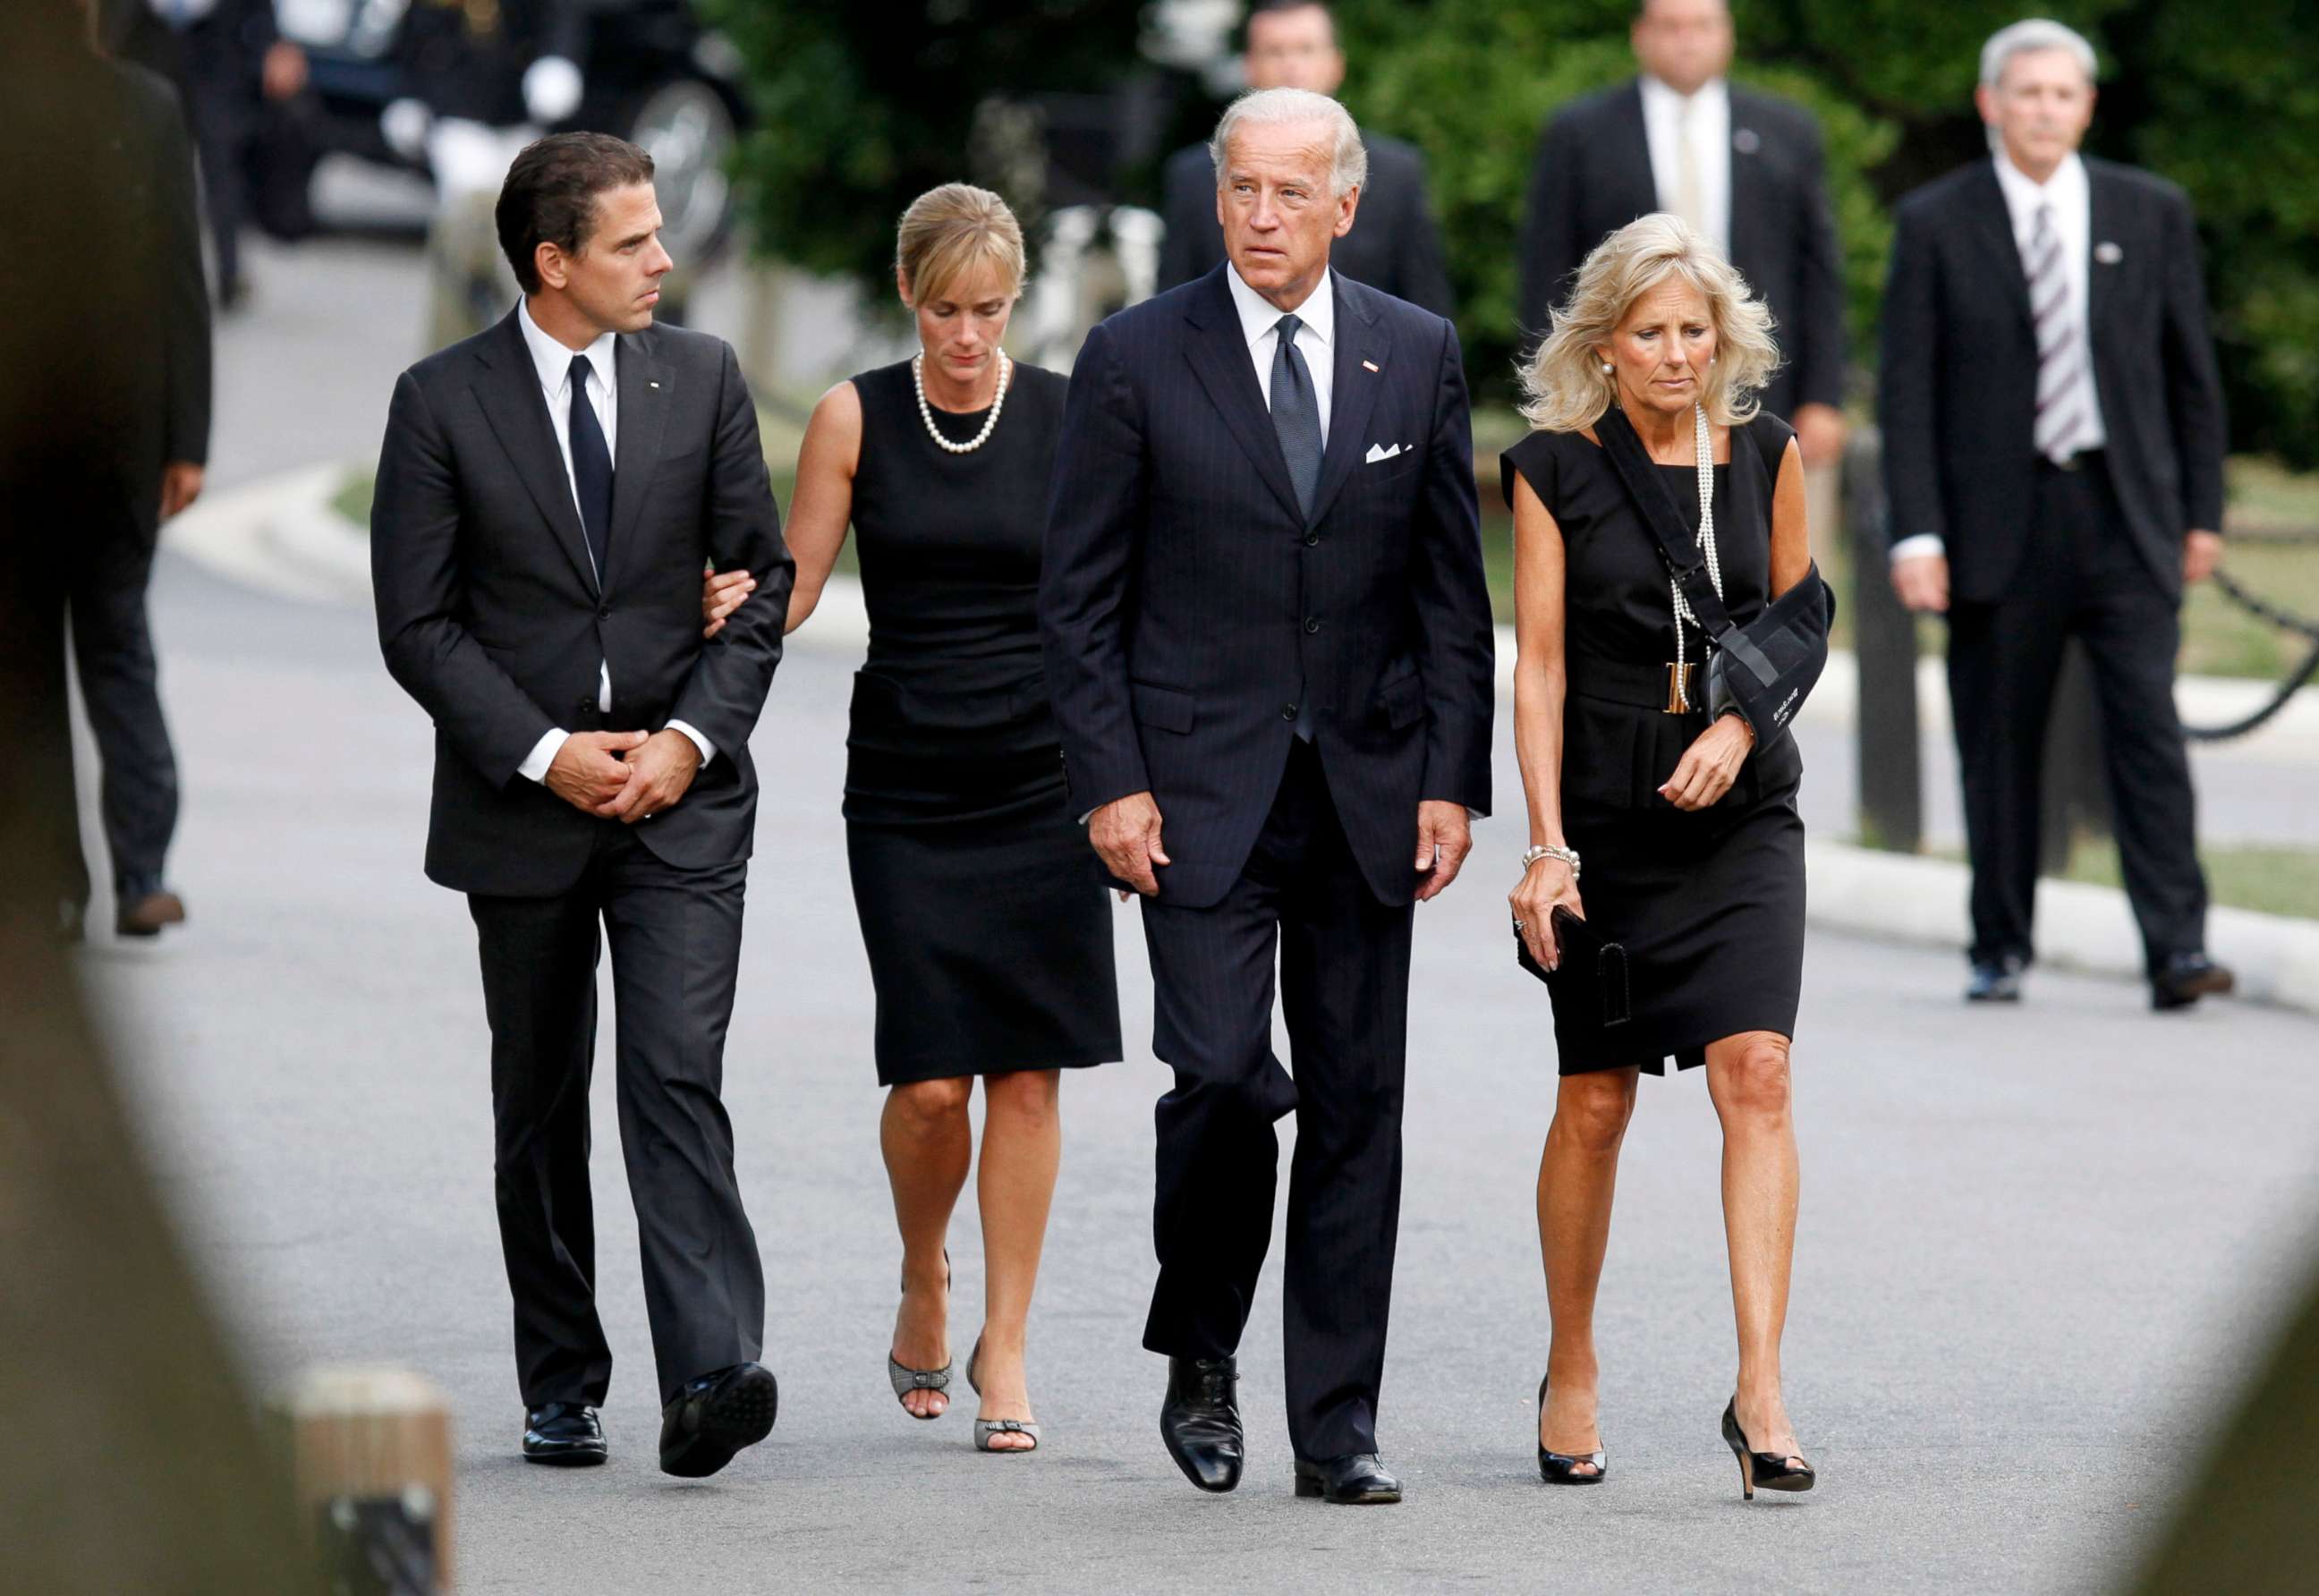 PHOTO: In this Aug. 29, 2009 file photo Vice President Joe Biden arrives at Arlington National Cemetery with his wife, Jill Biden (R), son Hunter Biden (L) and daughter-in-law, Kathleen Biden for the burial of Sen. Edward Kennedy in Arlington, Va.